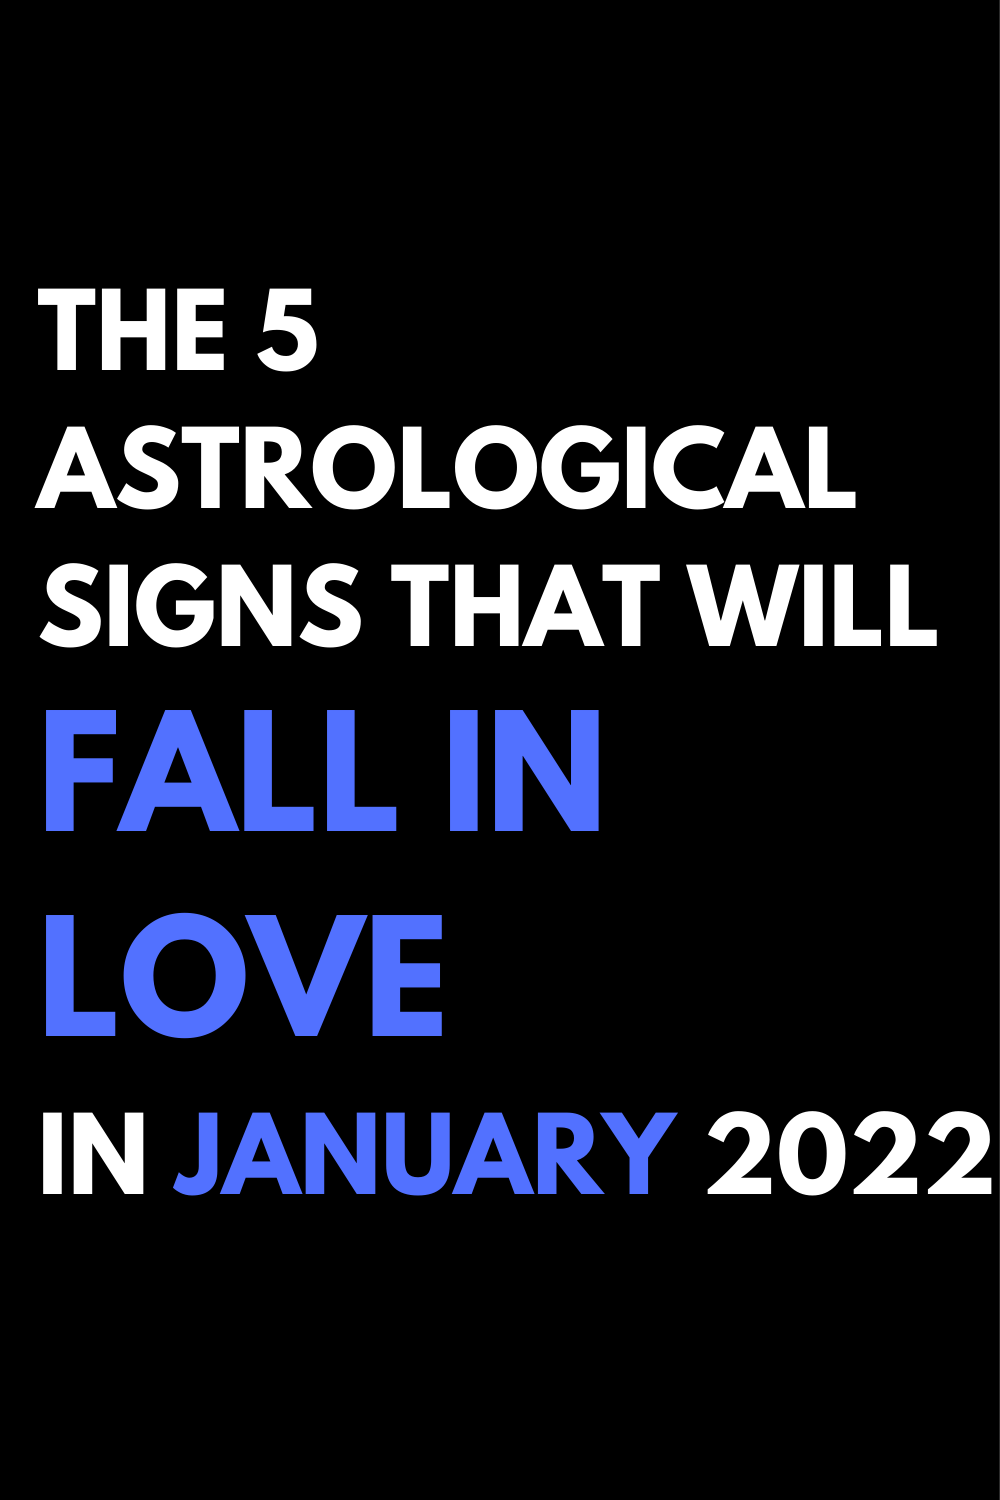 The 5 astrological signs that will fall in love in January 2022